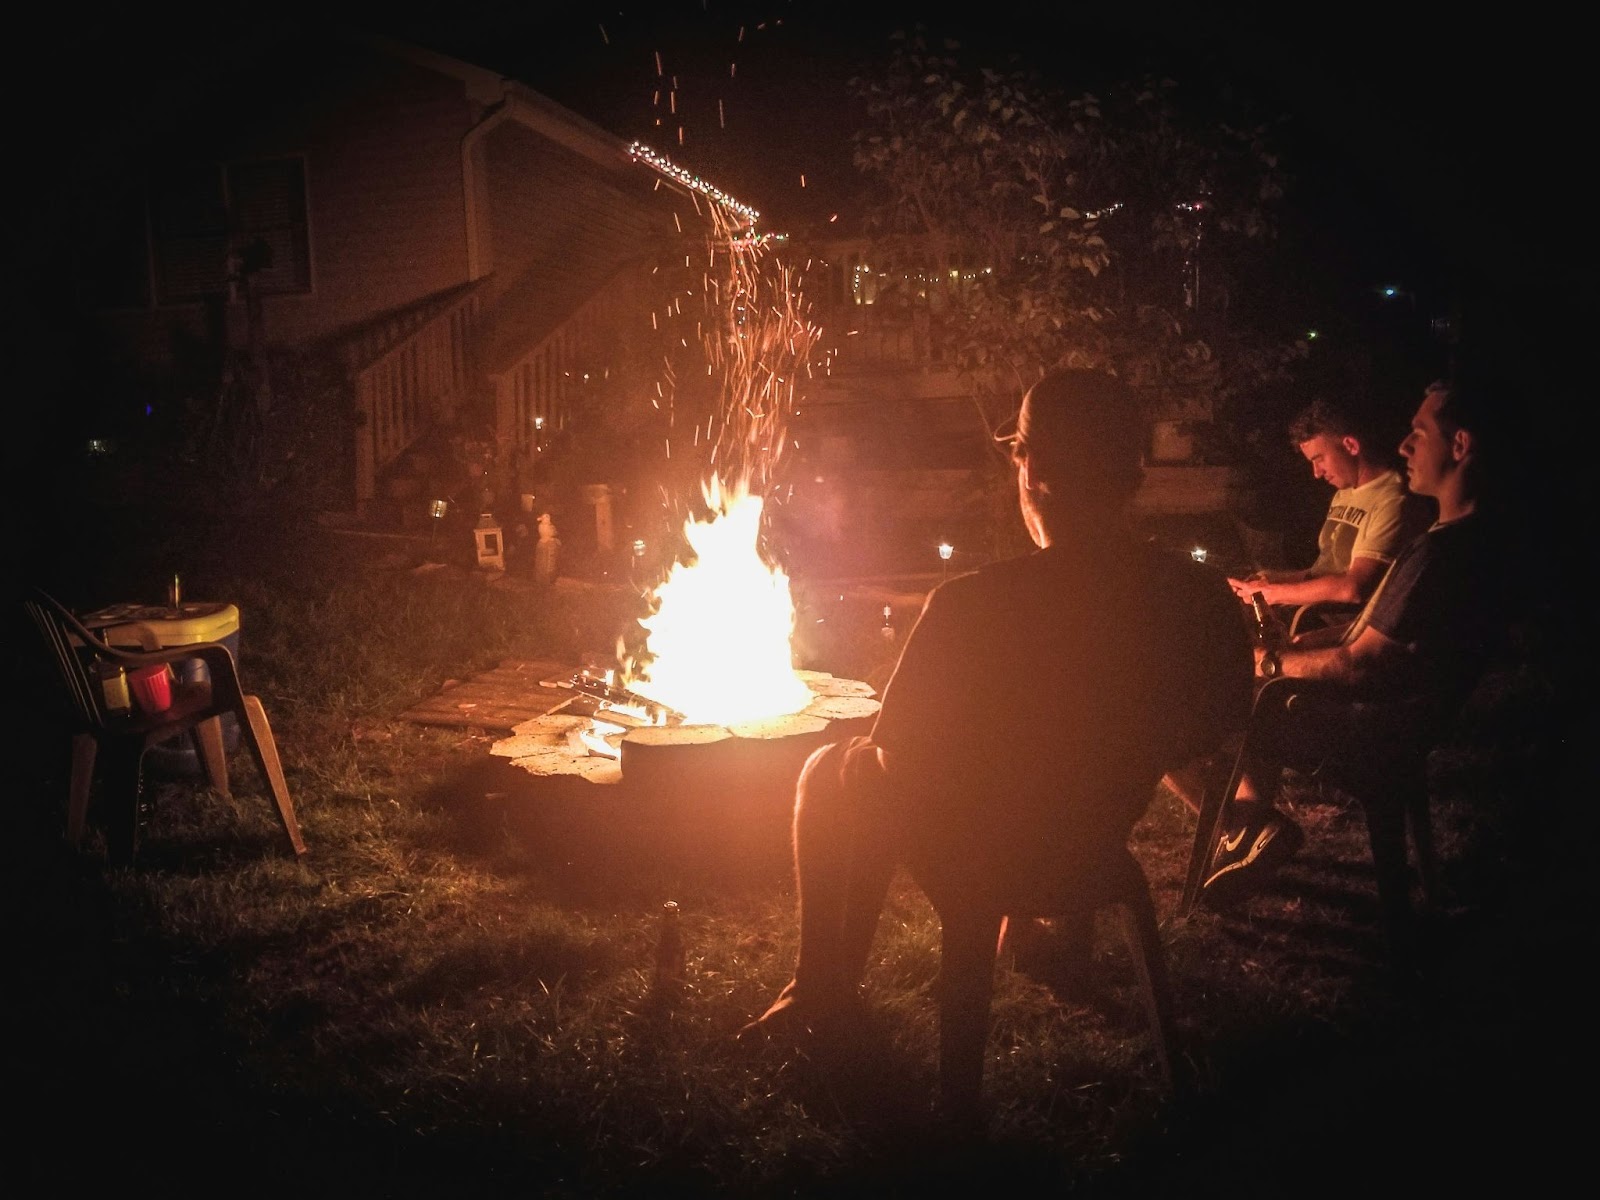 three young men at a cabin sitting having drinks around a wildfire with crackling embers rising into the sky, highlighting potential causes of forest fires in BC